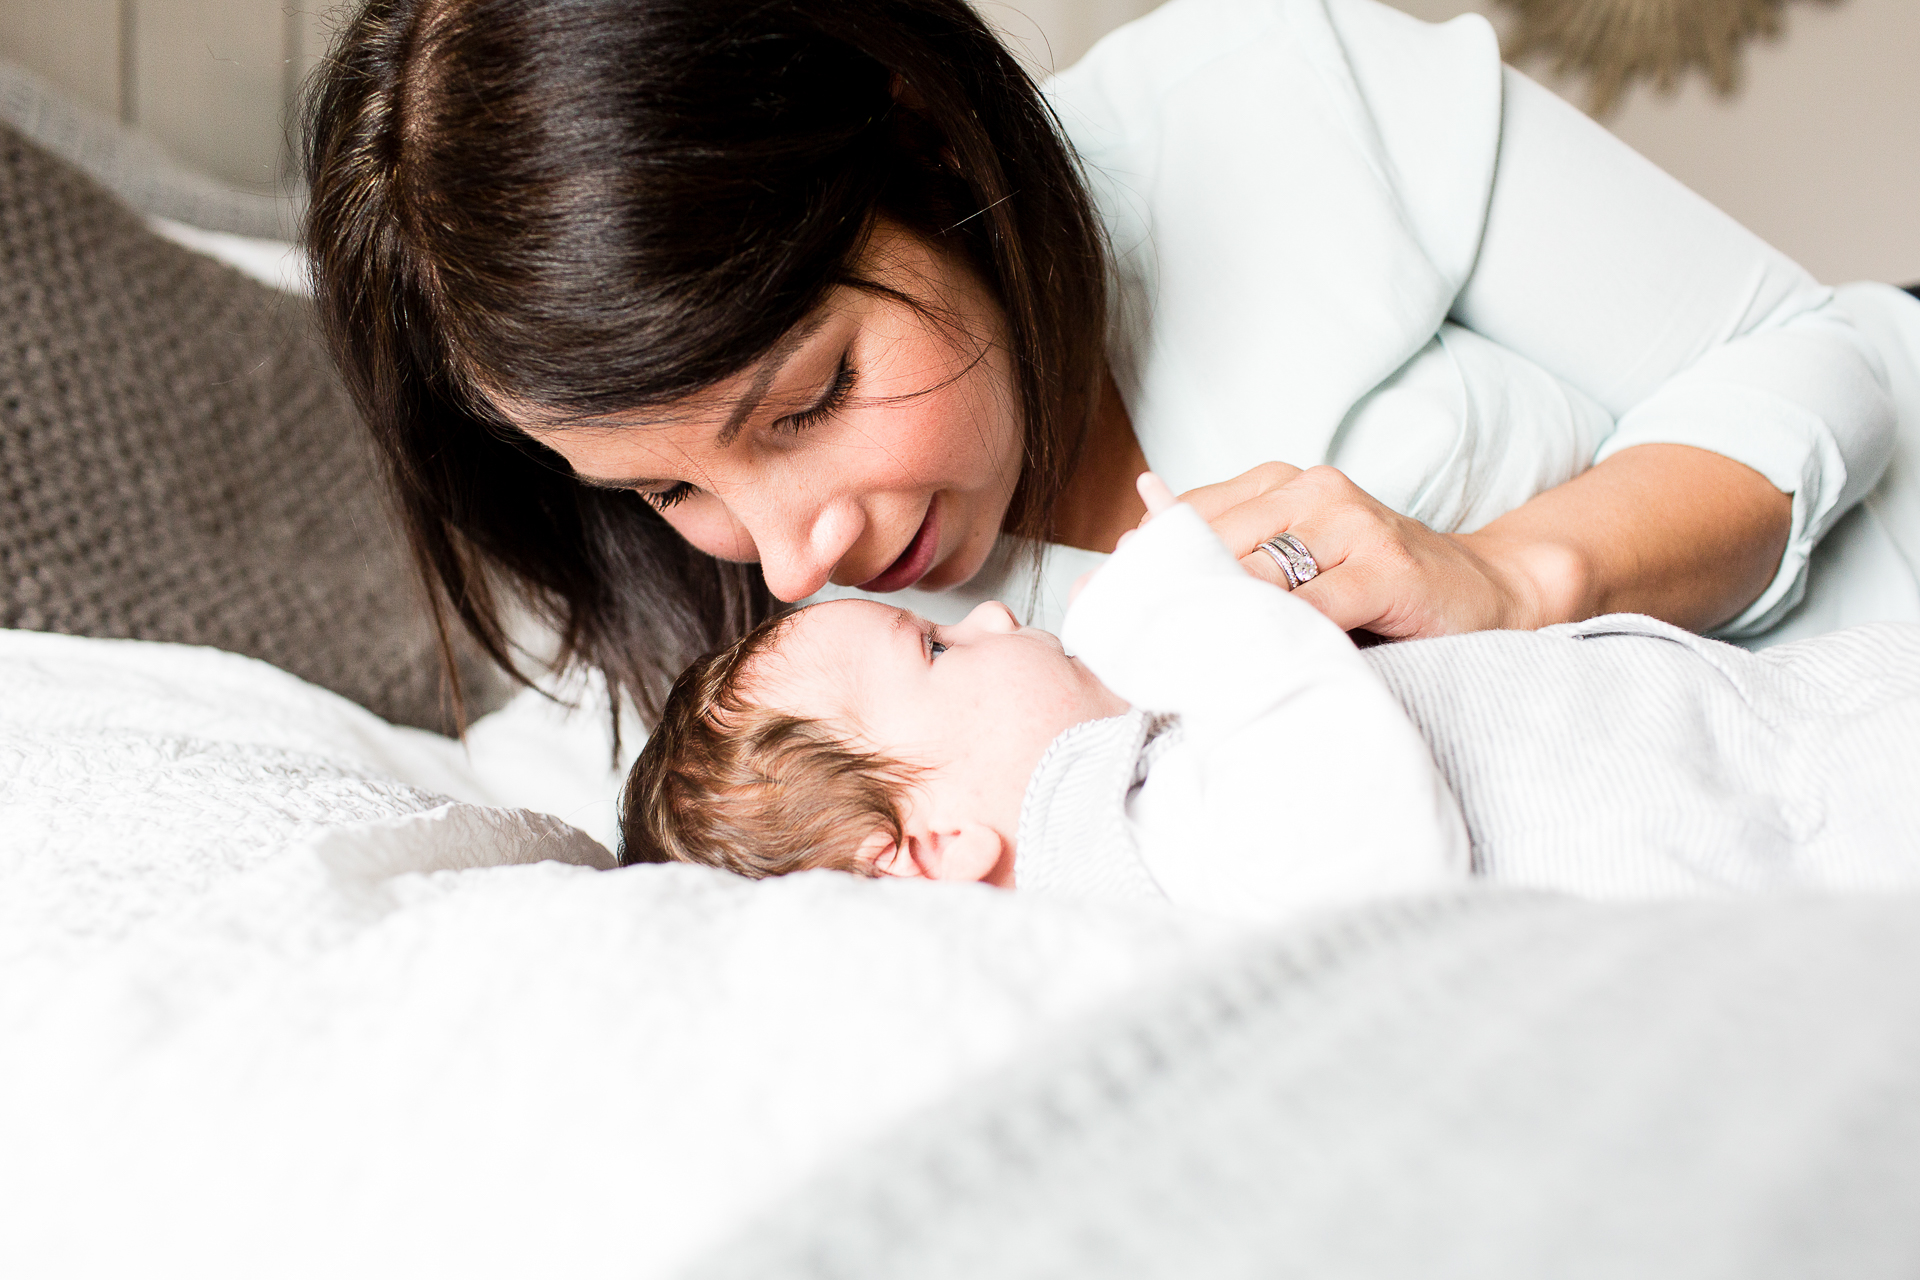 capturing a very special mommy, baby moment in this newborn photo shoot in Warwickshire